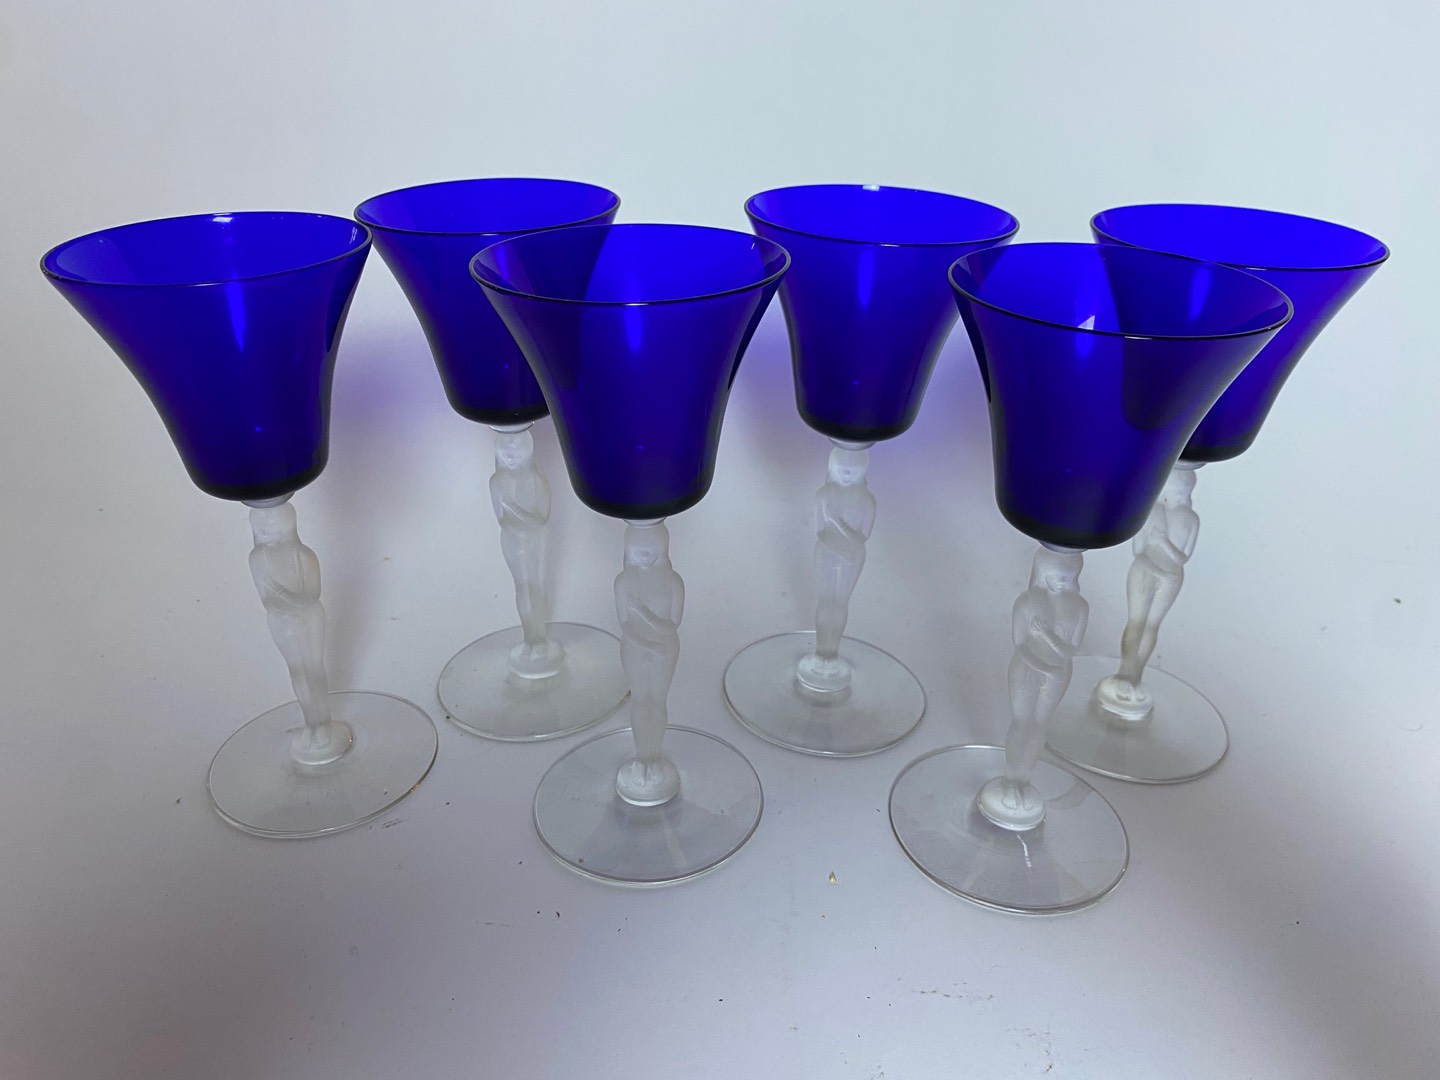 Cobalt Blue Glass Wine or Water Glasses. Set of Five Contemporary